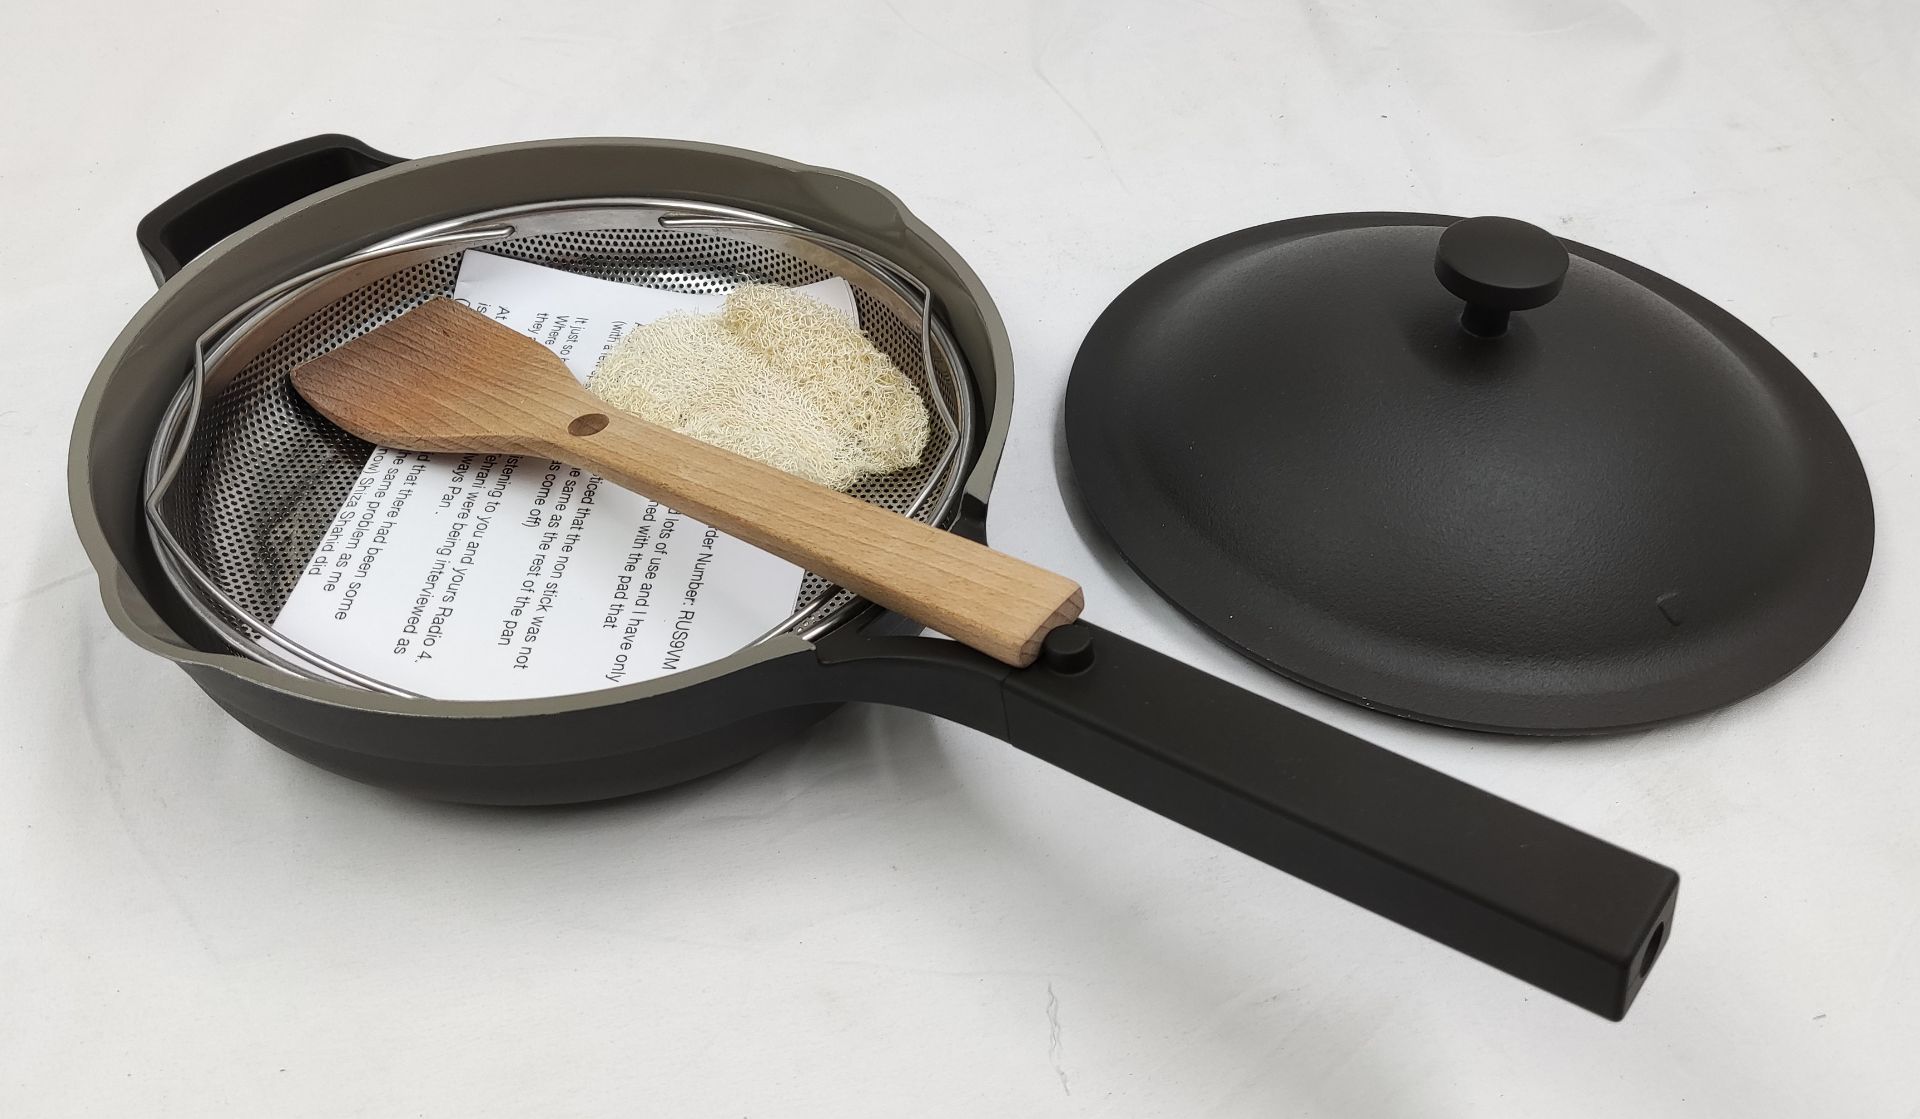 1 x OUR PLACE Our Place Cast Iron Always Pan In Charcoal - RRP £135 - Ref: 7260391/HOC165/HC6 - - Image 2 of 17